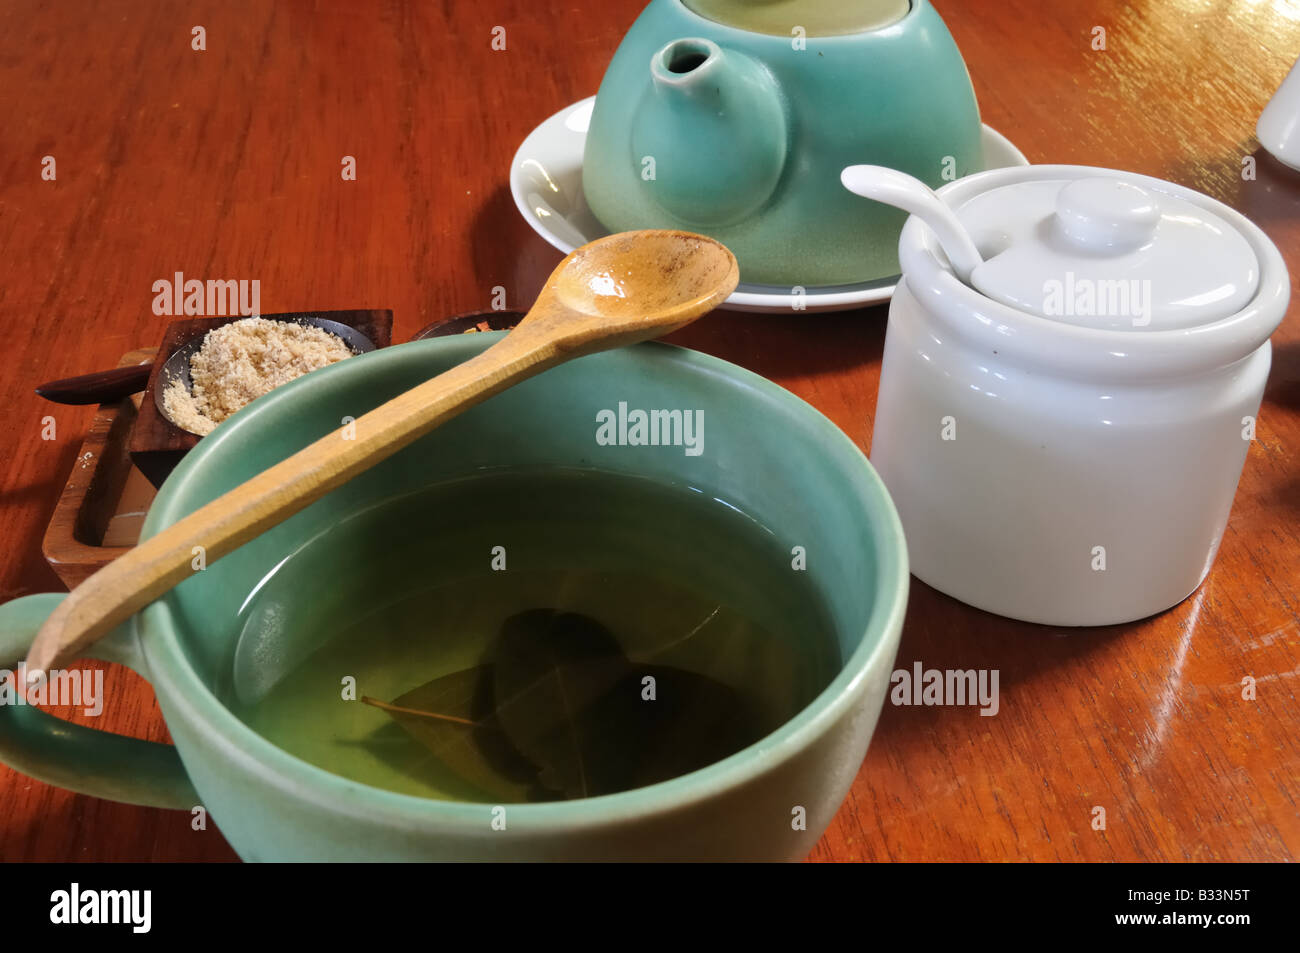 A coca tea set with a sugar dish, kettle and wooden spoon sit on a rich wood table.  Coca tea leaves are visible steeping. Stock Photo